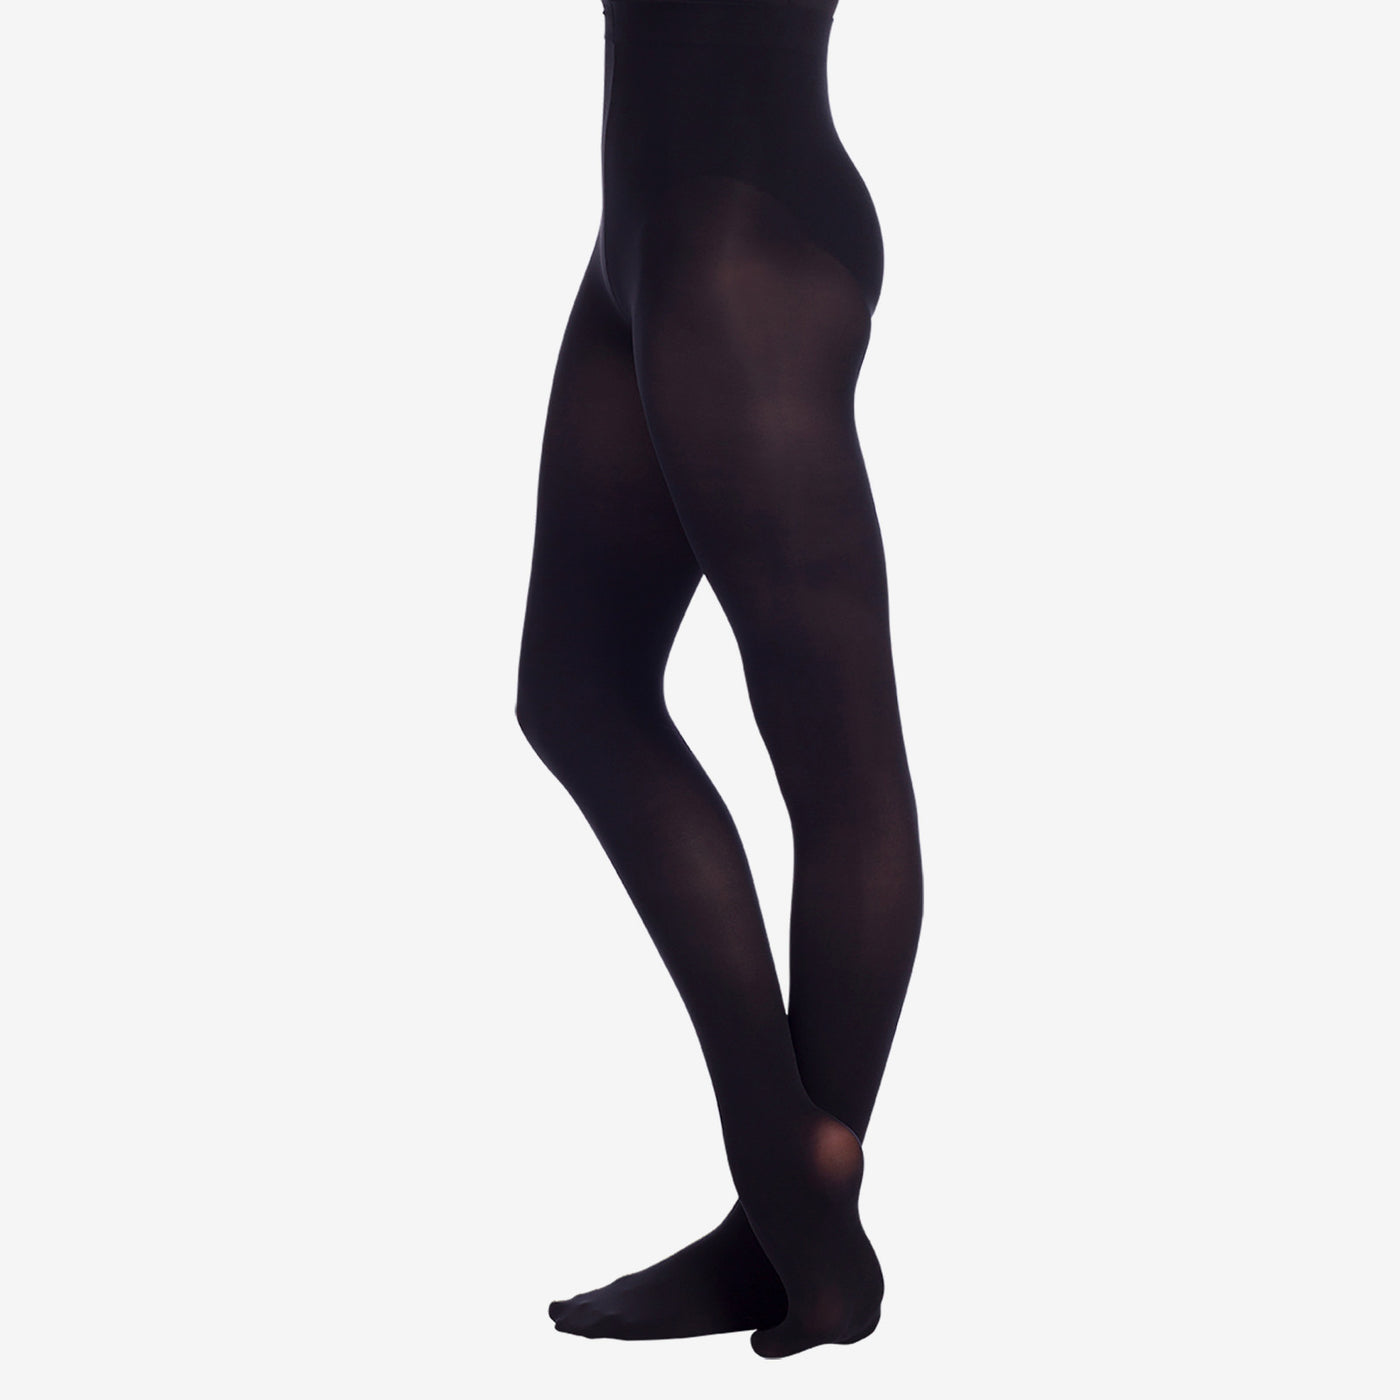 NEW! So Danca Women's Footless Dance Tights - Style TS-74 - You Go